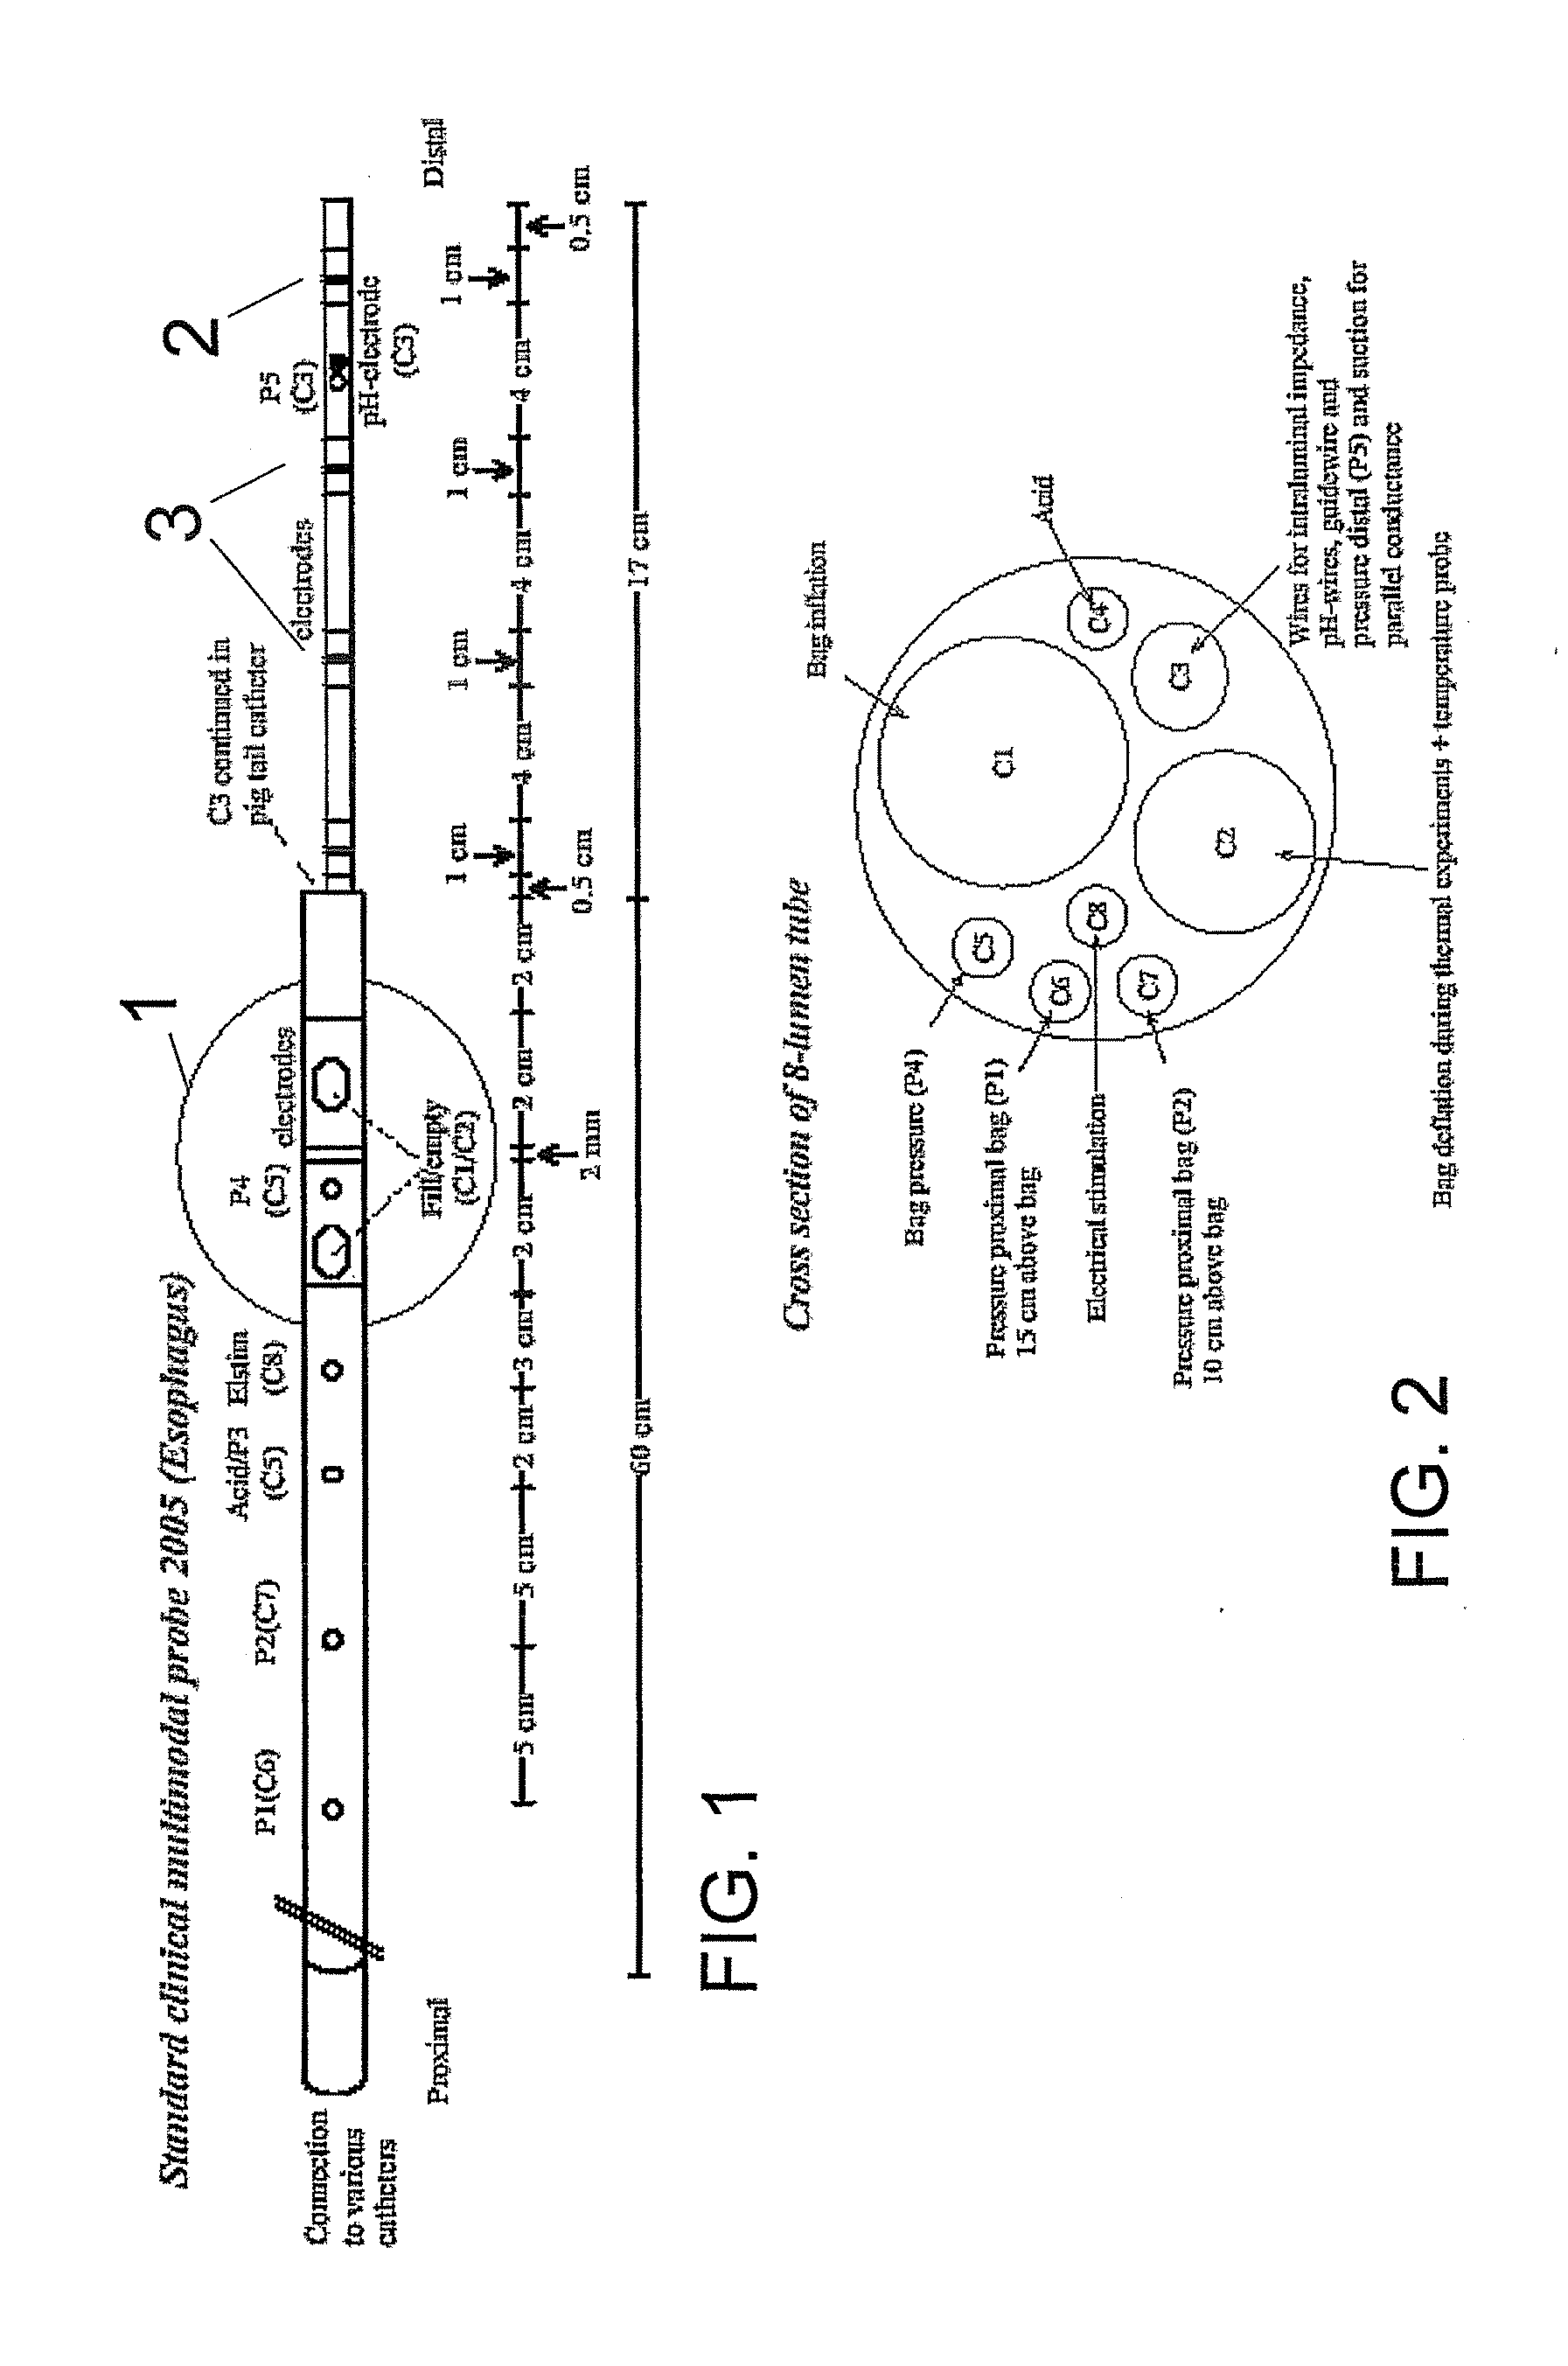 Apparatus and method for a global model of hollow internal organs including the determination of cross-sectional areas and volume in internal hollow organs and wall properties